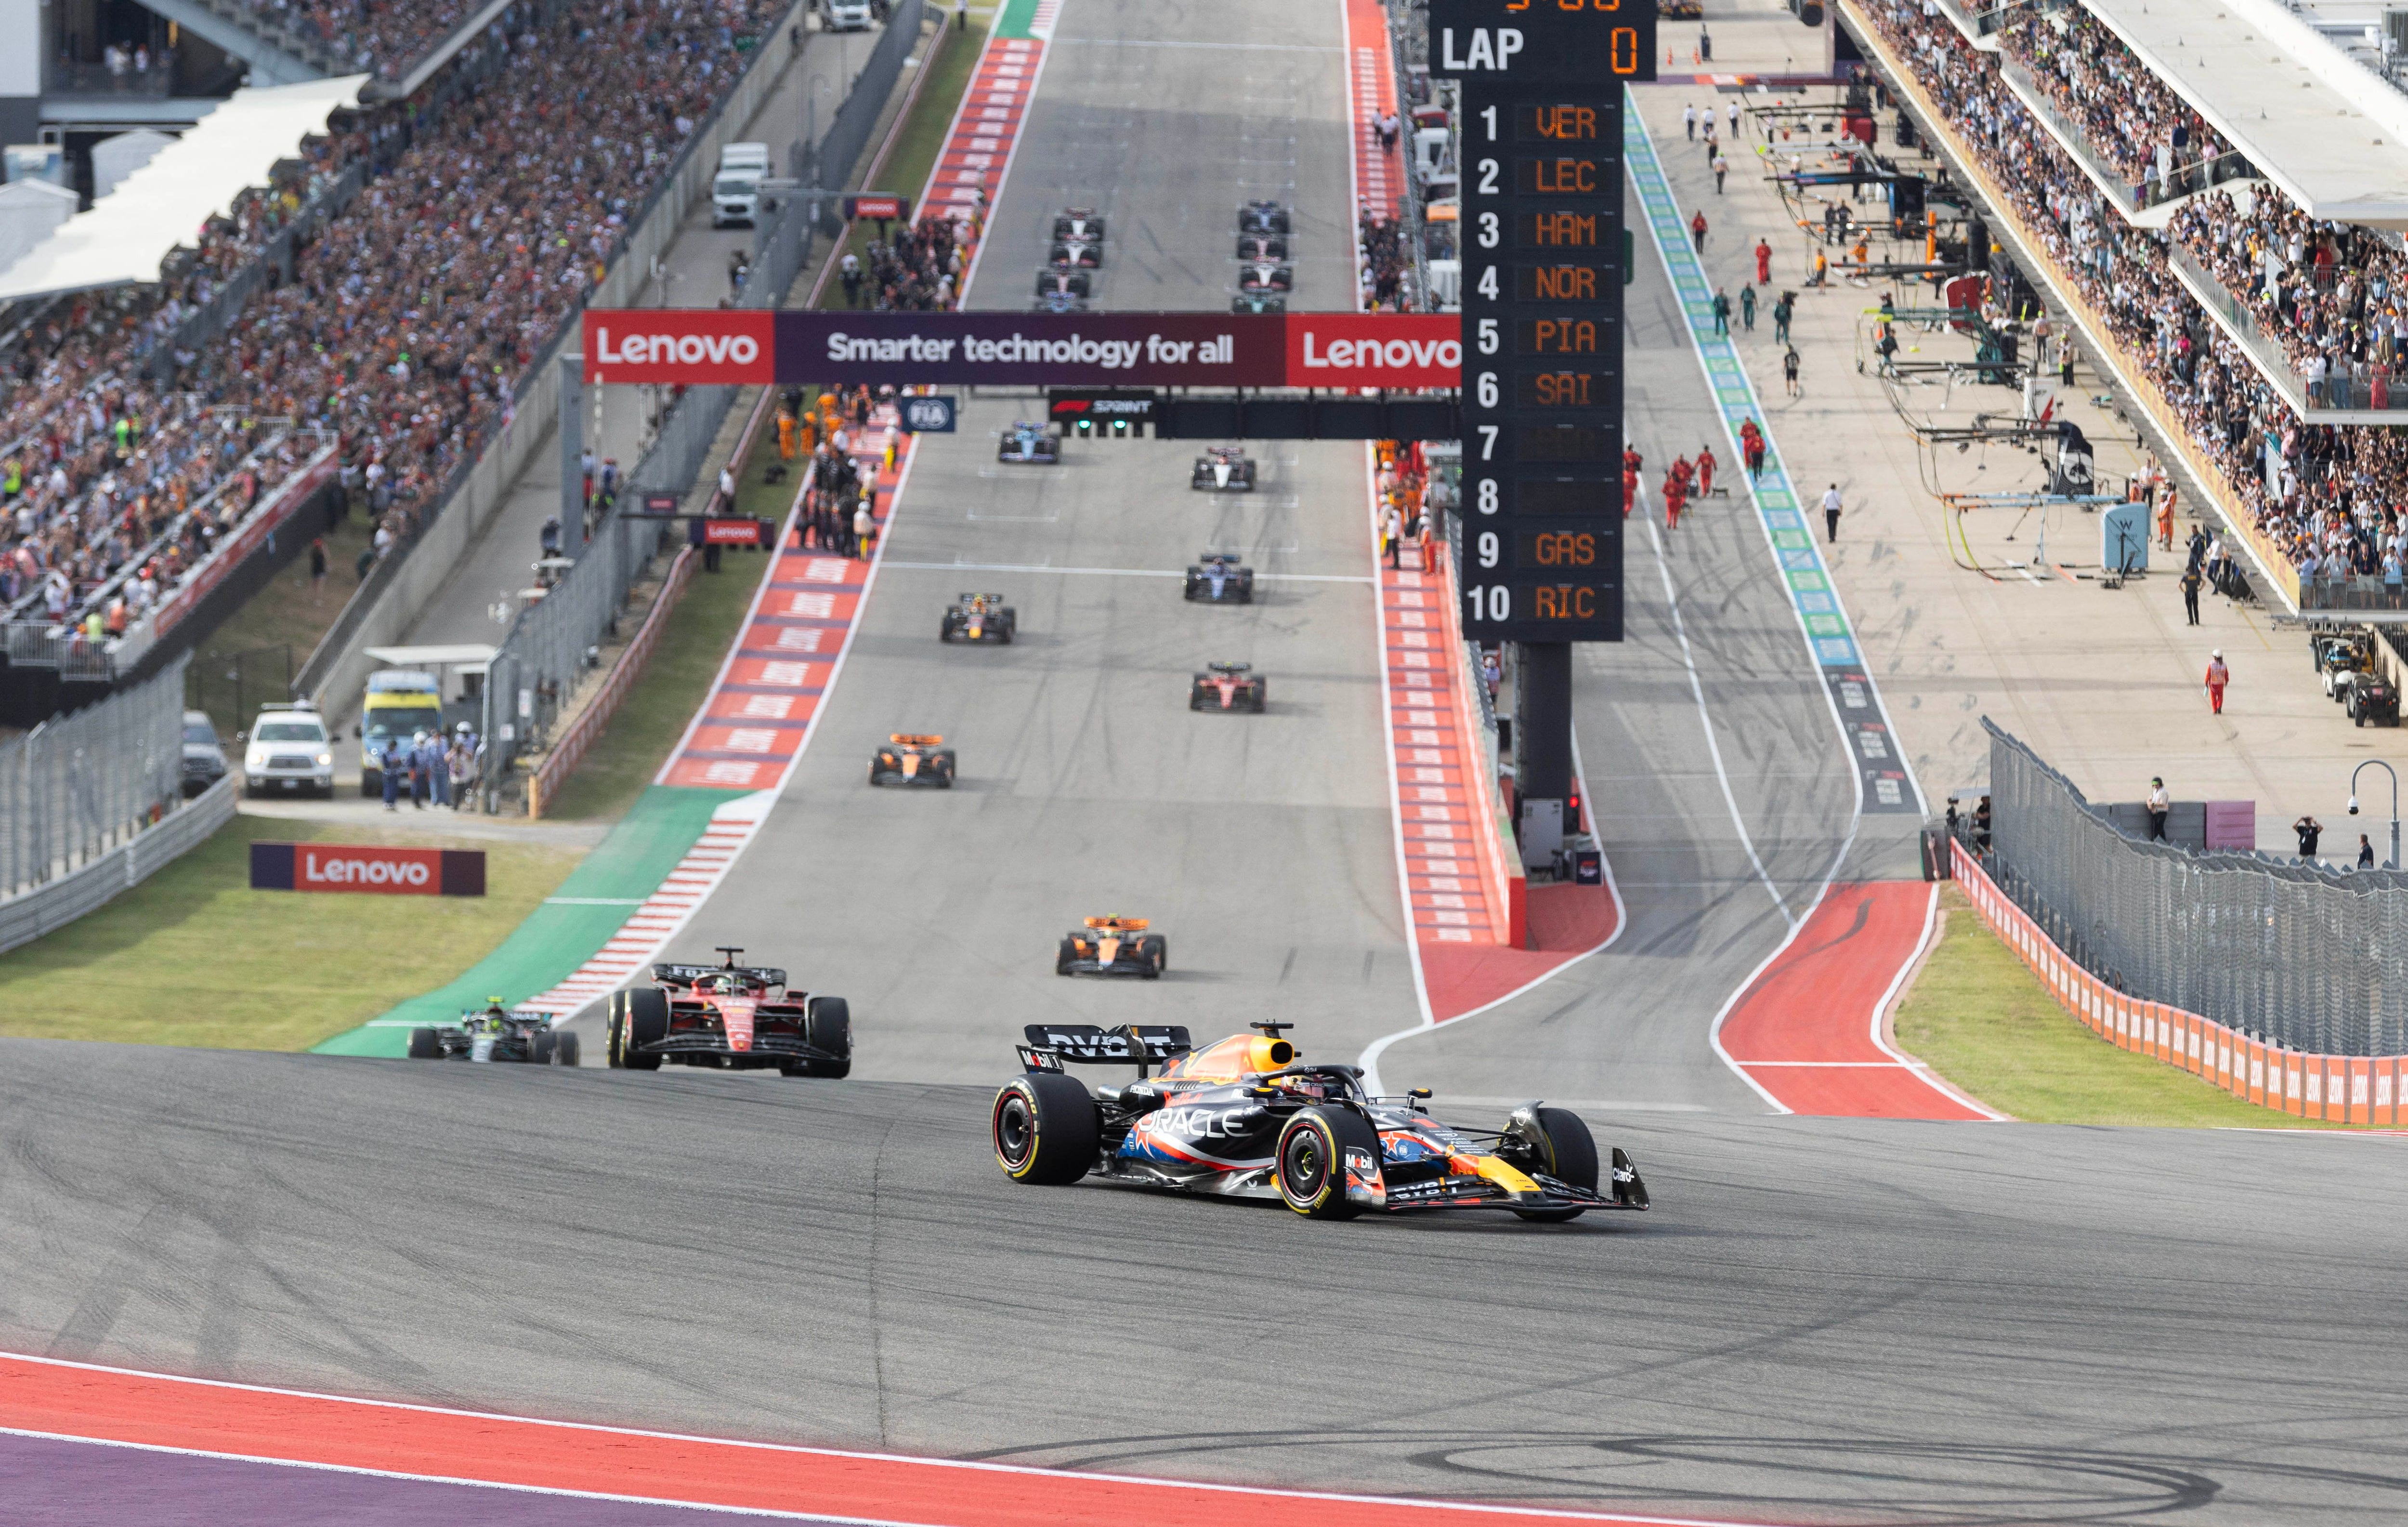 Oct 21, 2023; Austin, Texas, USA; Max Verstappen of Red Bull Racing (1) leads the pack at the start to win the Sprint Race of the 2023 United States Grand Prix at Circuit of the Americas. Mandatory Credit: Erich Schlegel-USA TODAY Sports